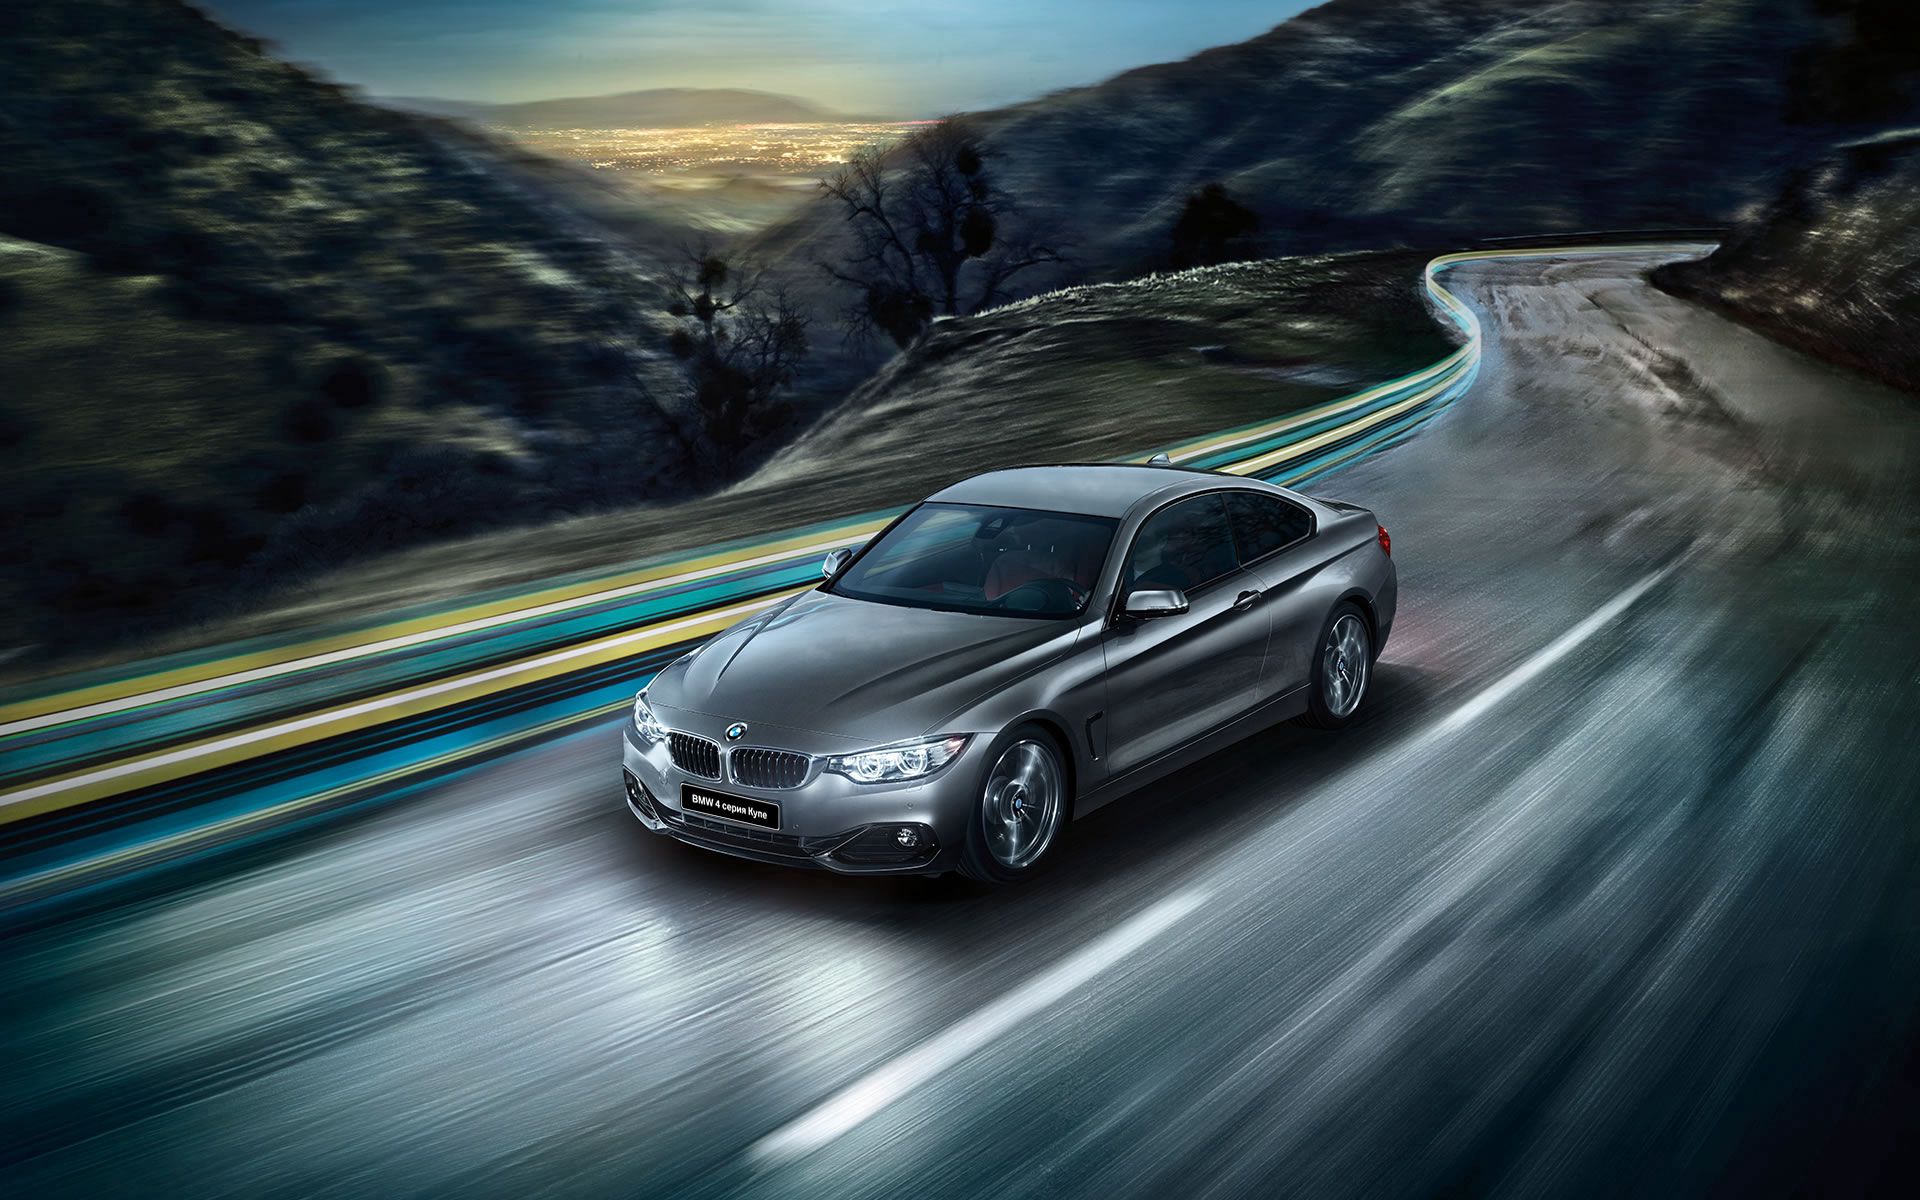 bmw, cars, movement, road, traffic, 4 series, f32 wallpaper for mobile